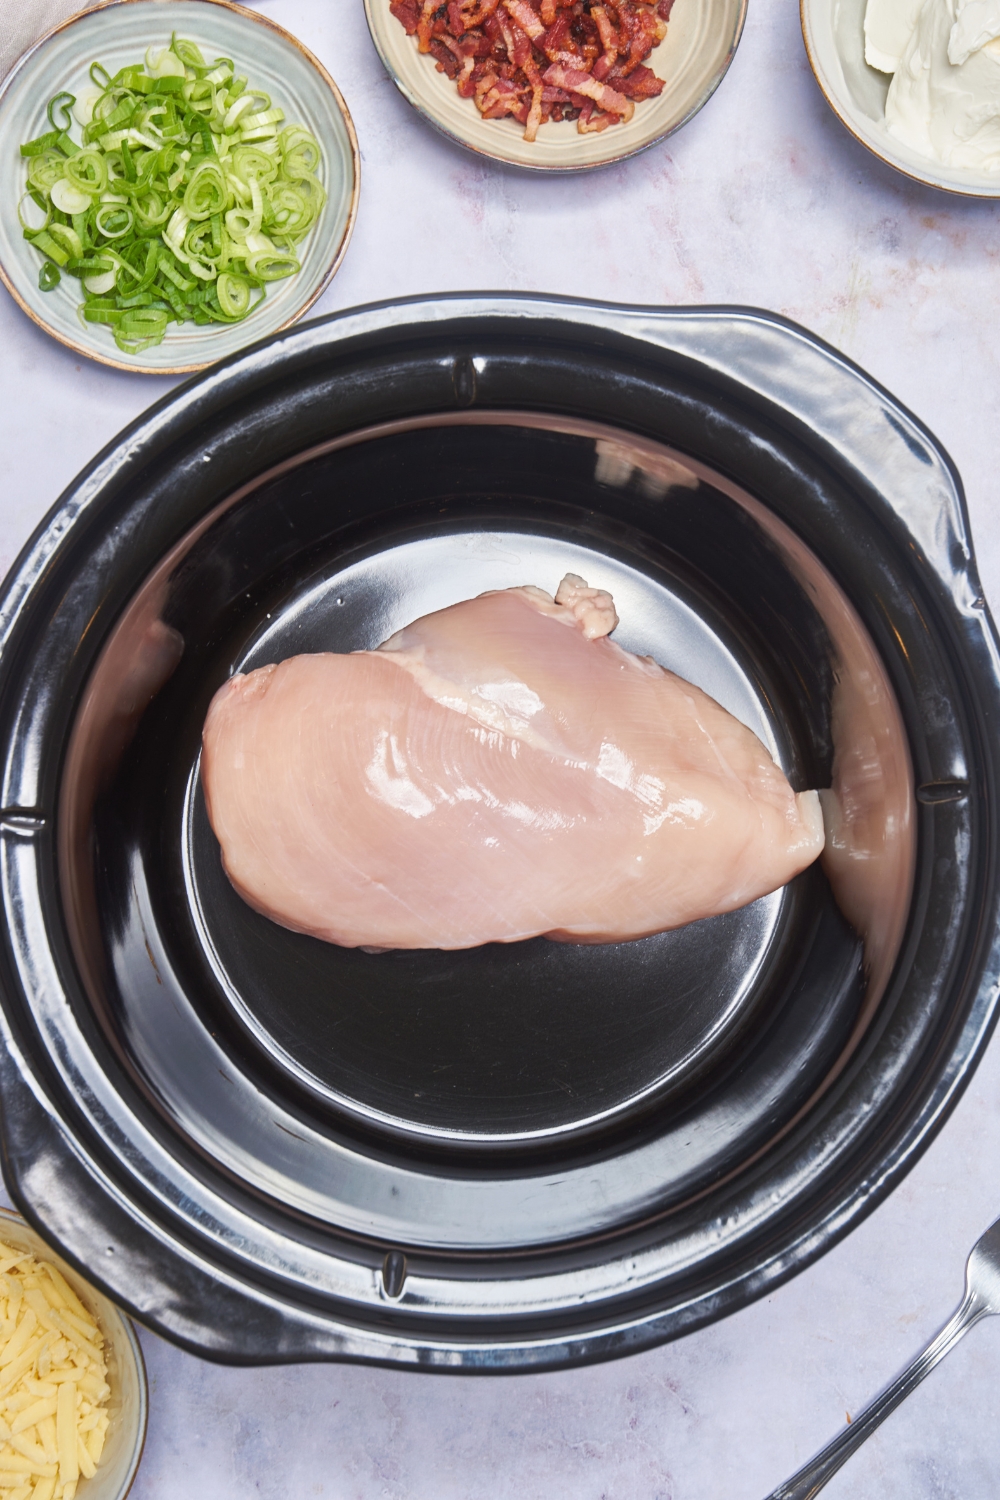 A raw chicken breast in the bottom of a slow cooker.